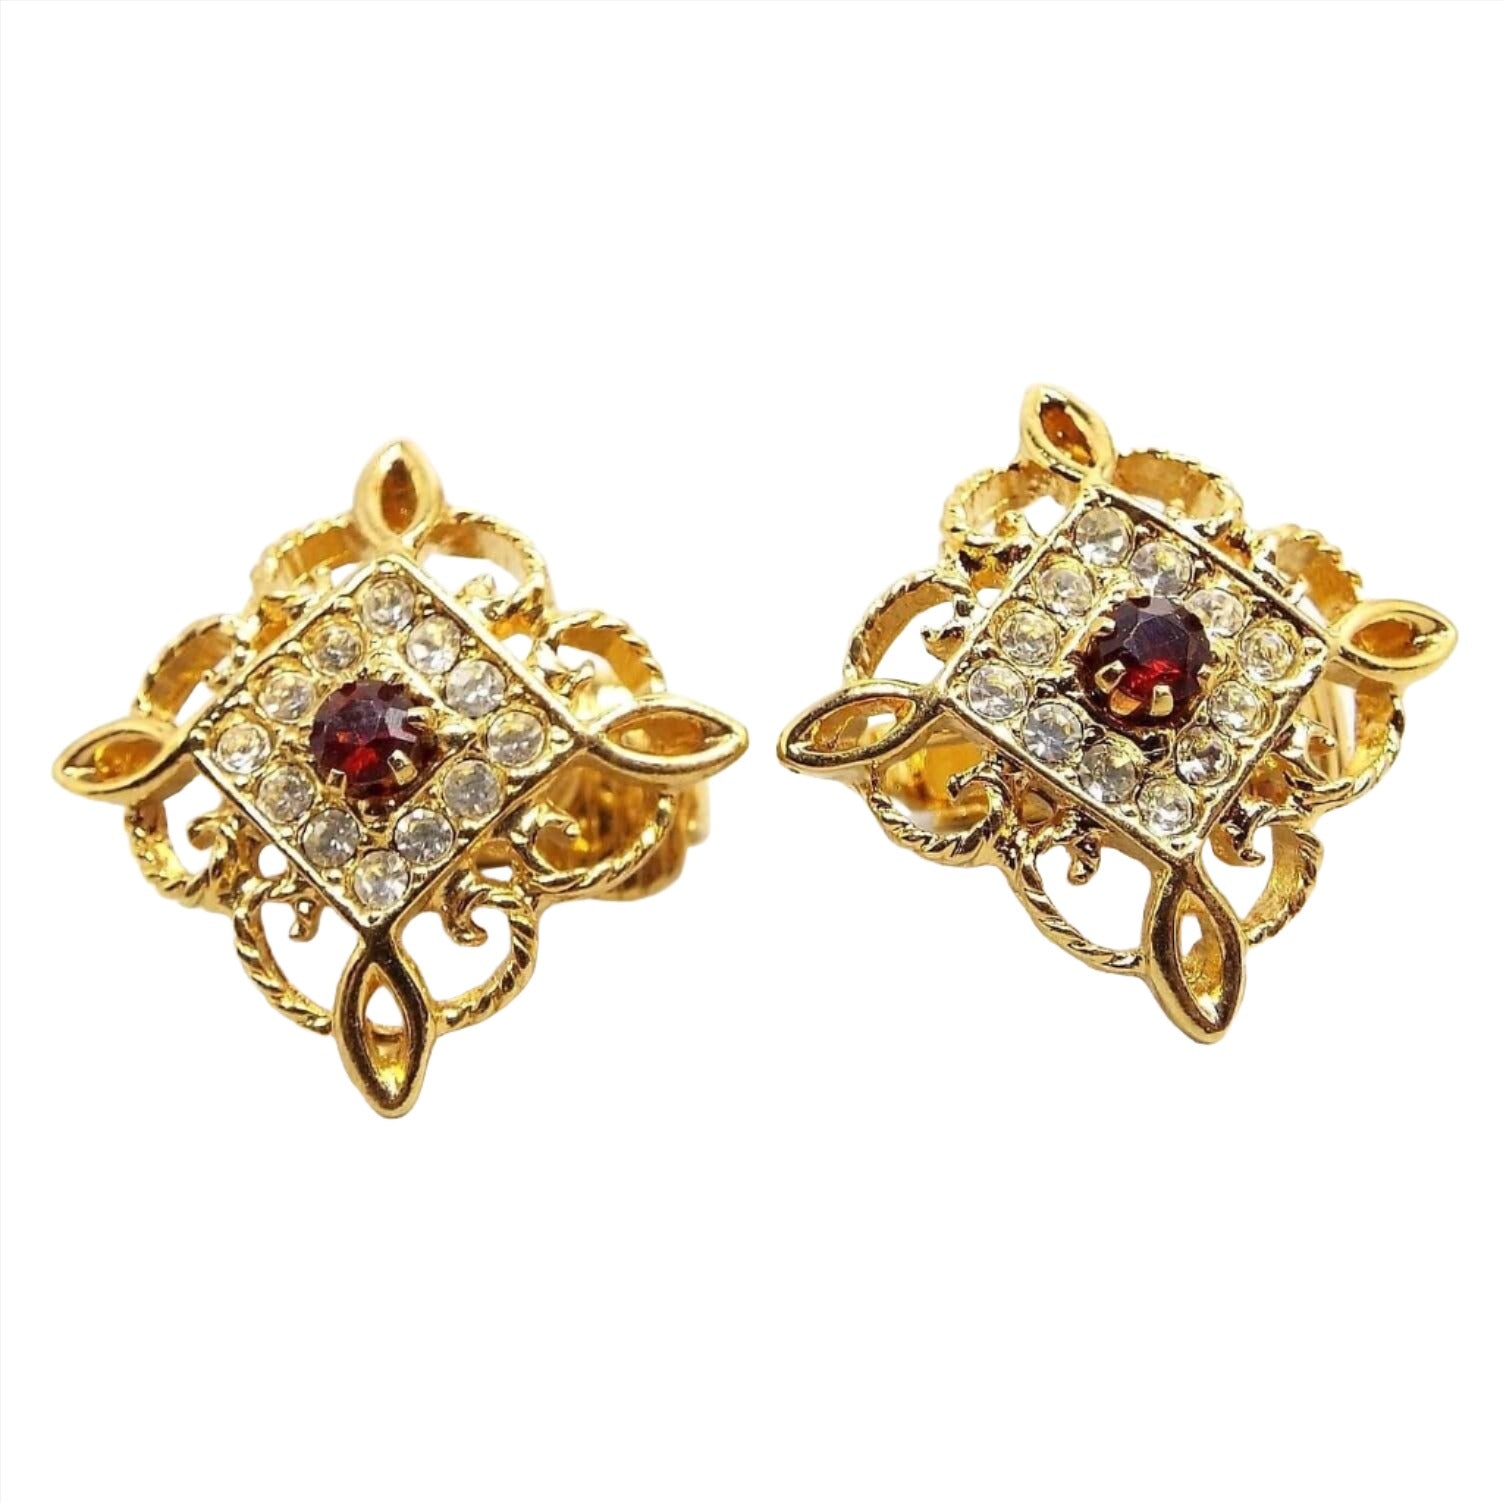 Front view or the retro vintage Avon clip on earrings. They are diamond shaped with a filigree open fancy scroll like design around the outer edge. There is an inner diamond shaped area with pavé set small round clear rhinestones. There is a larger sized round deep red rhinestone in the middle. 